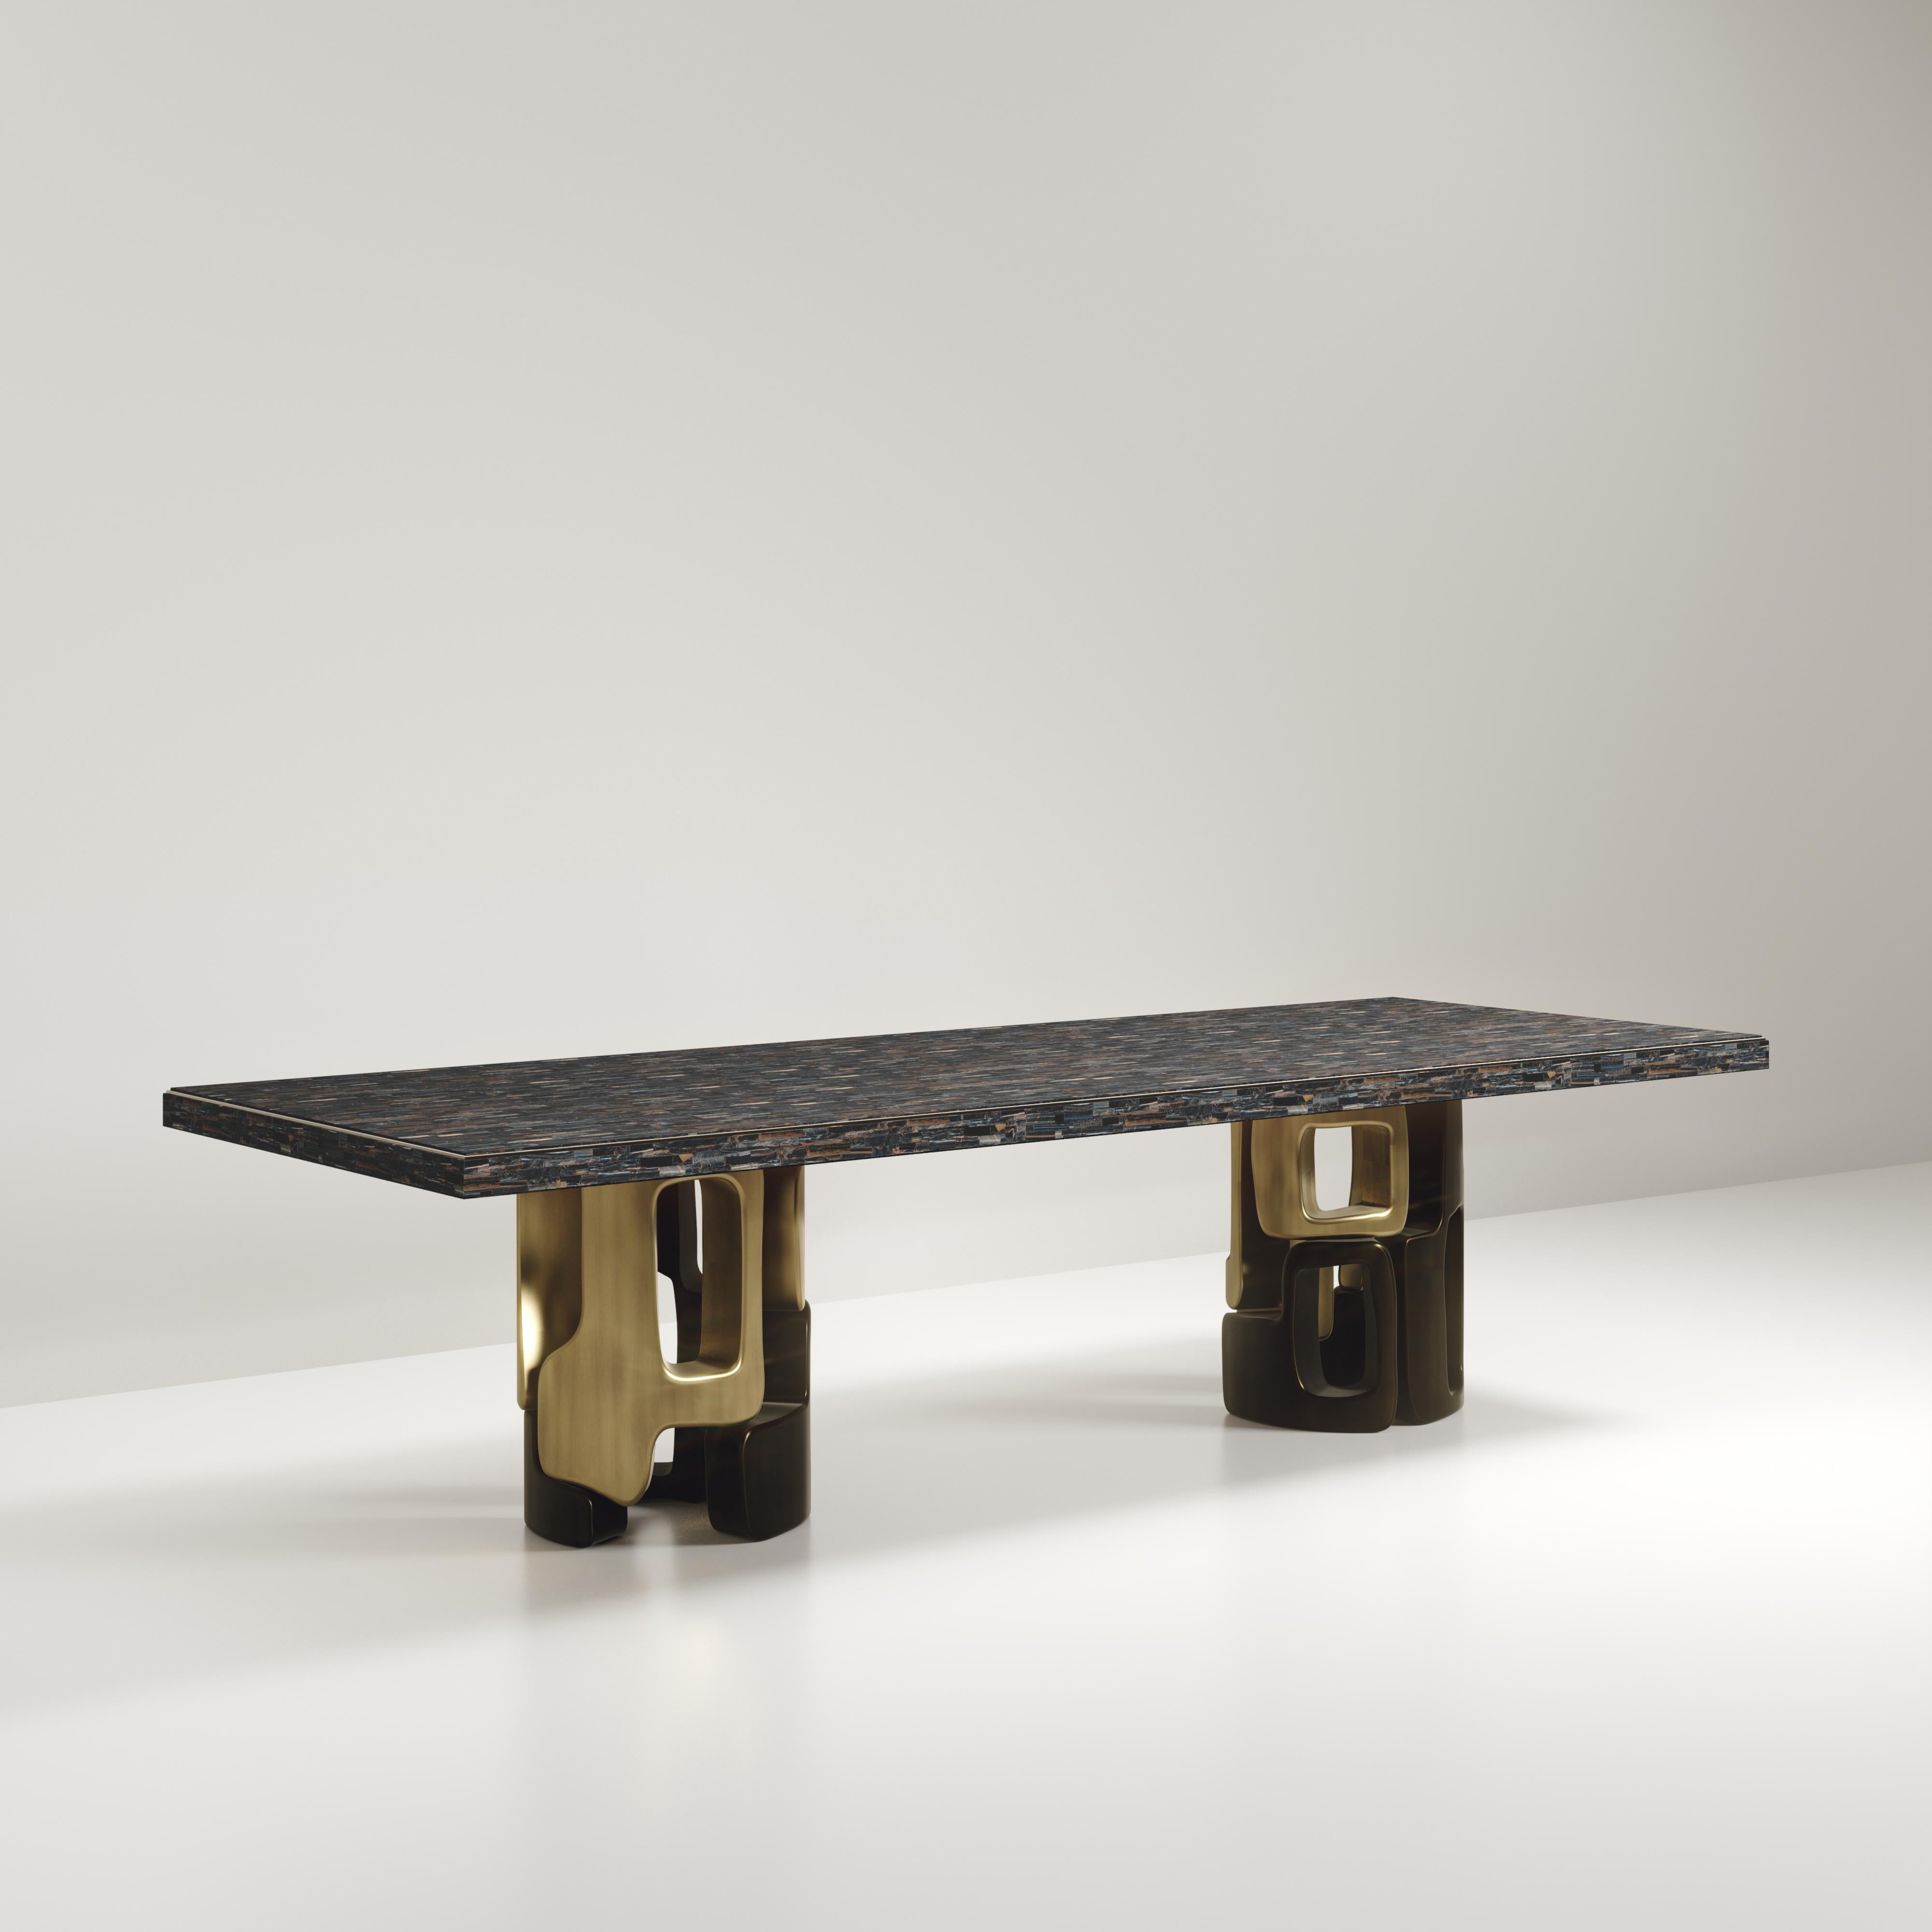 The Apoli I Dining table by Kifu Paris is both dramatic and organic in its unique design. The stunning semi-precious Tiger Eye Blue top sits on a pair of geometric and sculptural bronze-patina brass bases. This piece is designed by Kifu Augousti the